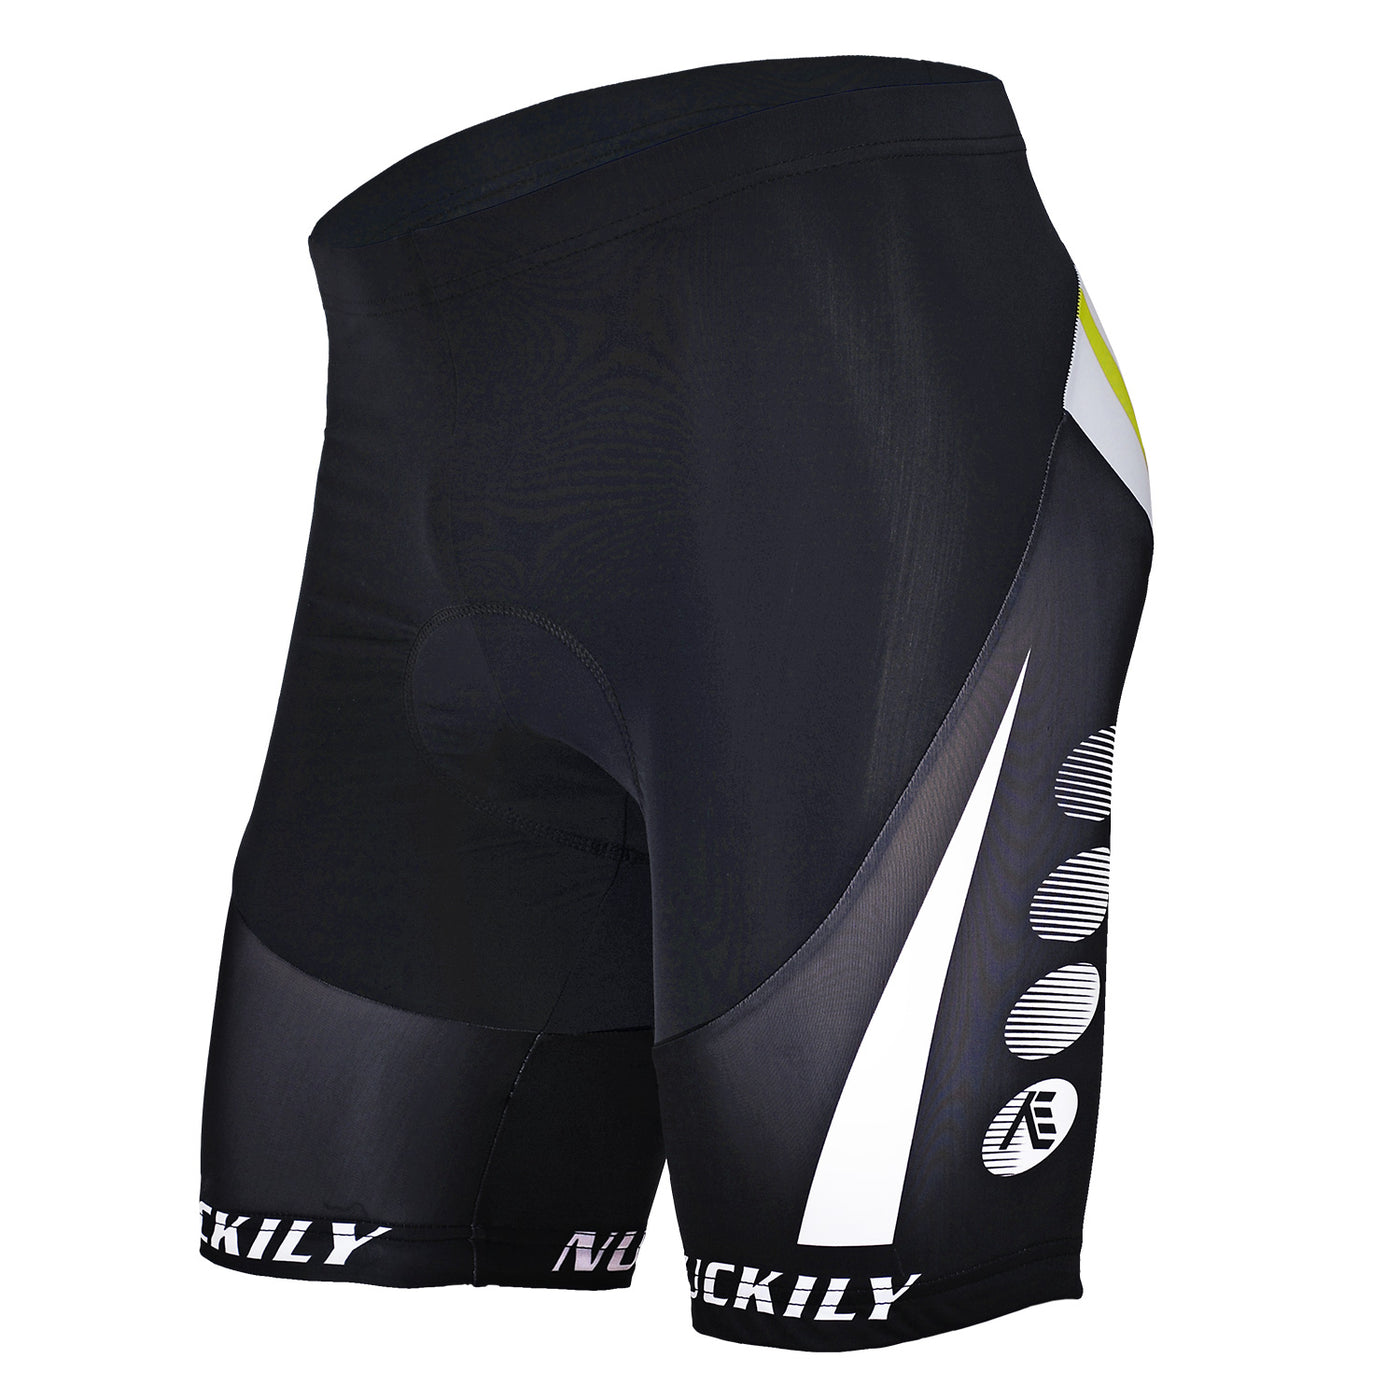 Buy Cycling Shorts Online  Wide Range, Best Price - BUMSONTHESADDLE